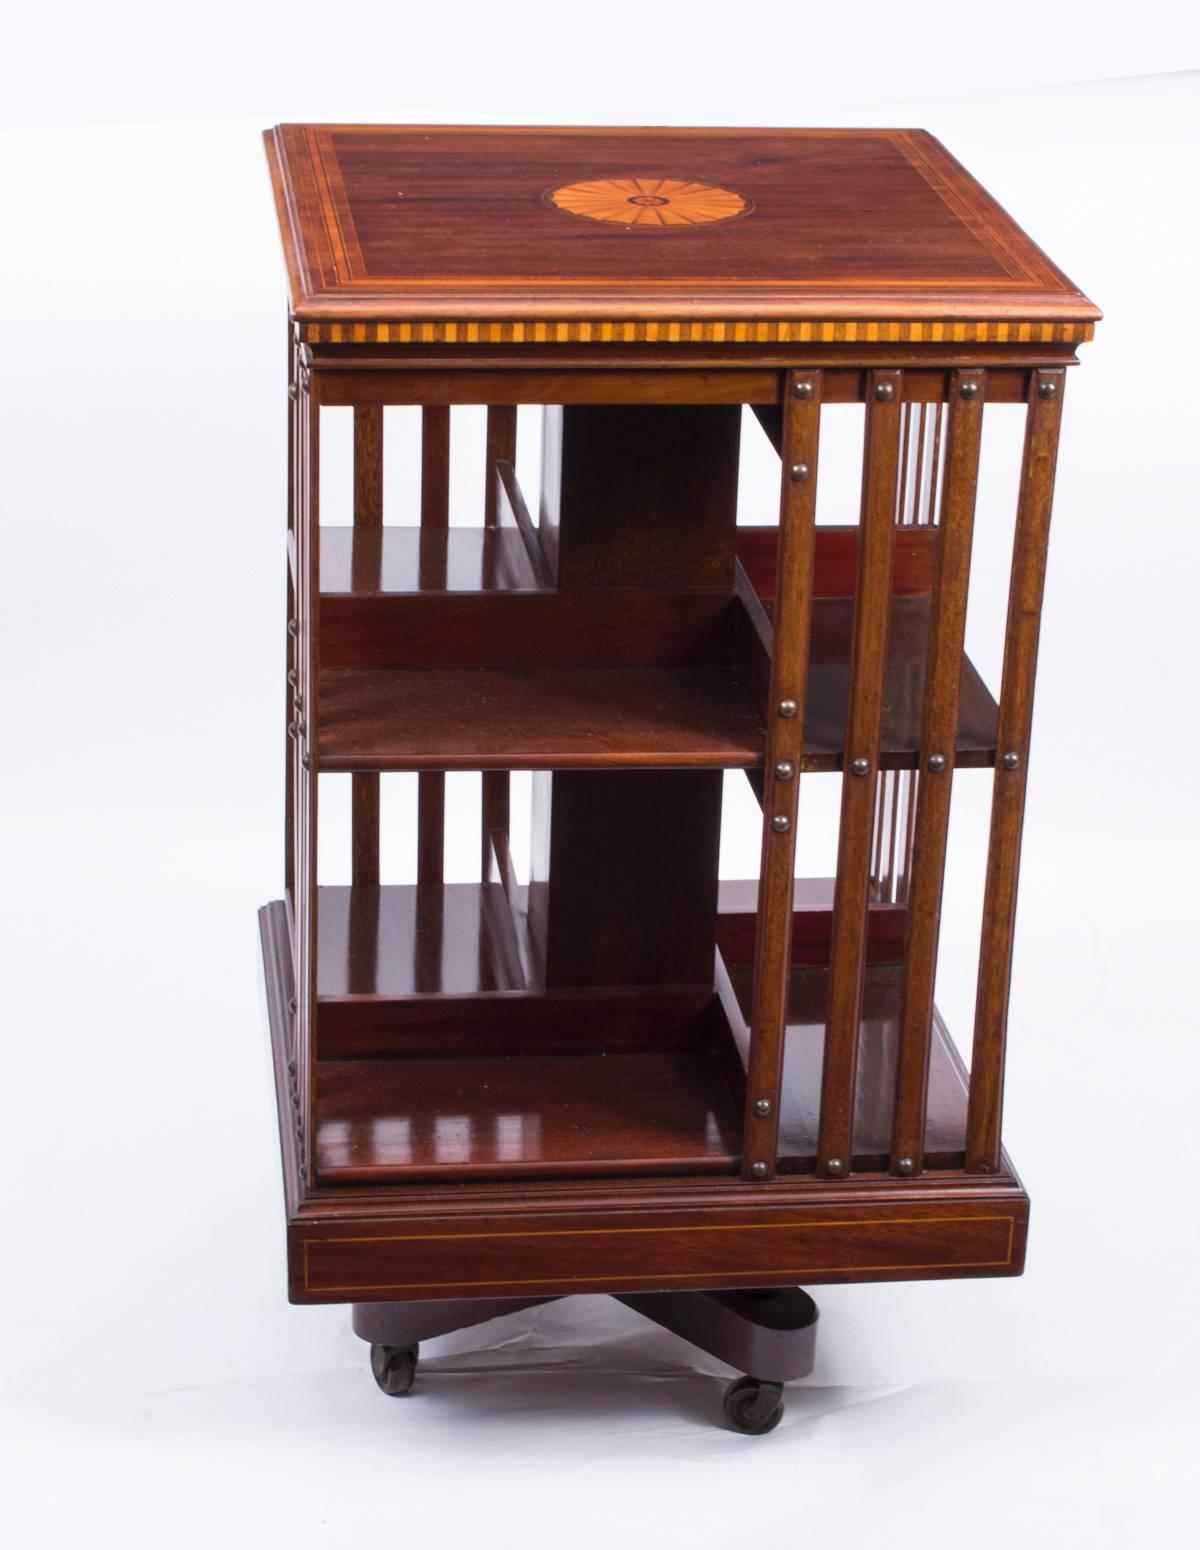 This an exquisite antique revolving bookcase bearing the ivorine plaque of the renowned Victorian retailer and manufacturer Maple & Co, circa 1900 in date.

It is made of mahogany, revolves on a solid cast iron base, has inlaid boxwood lines to